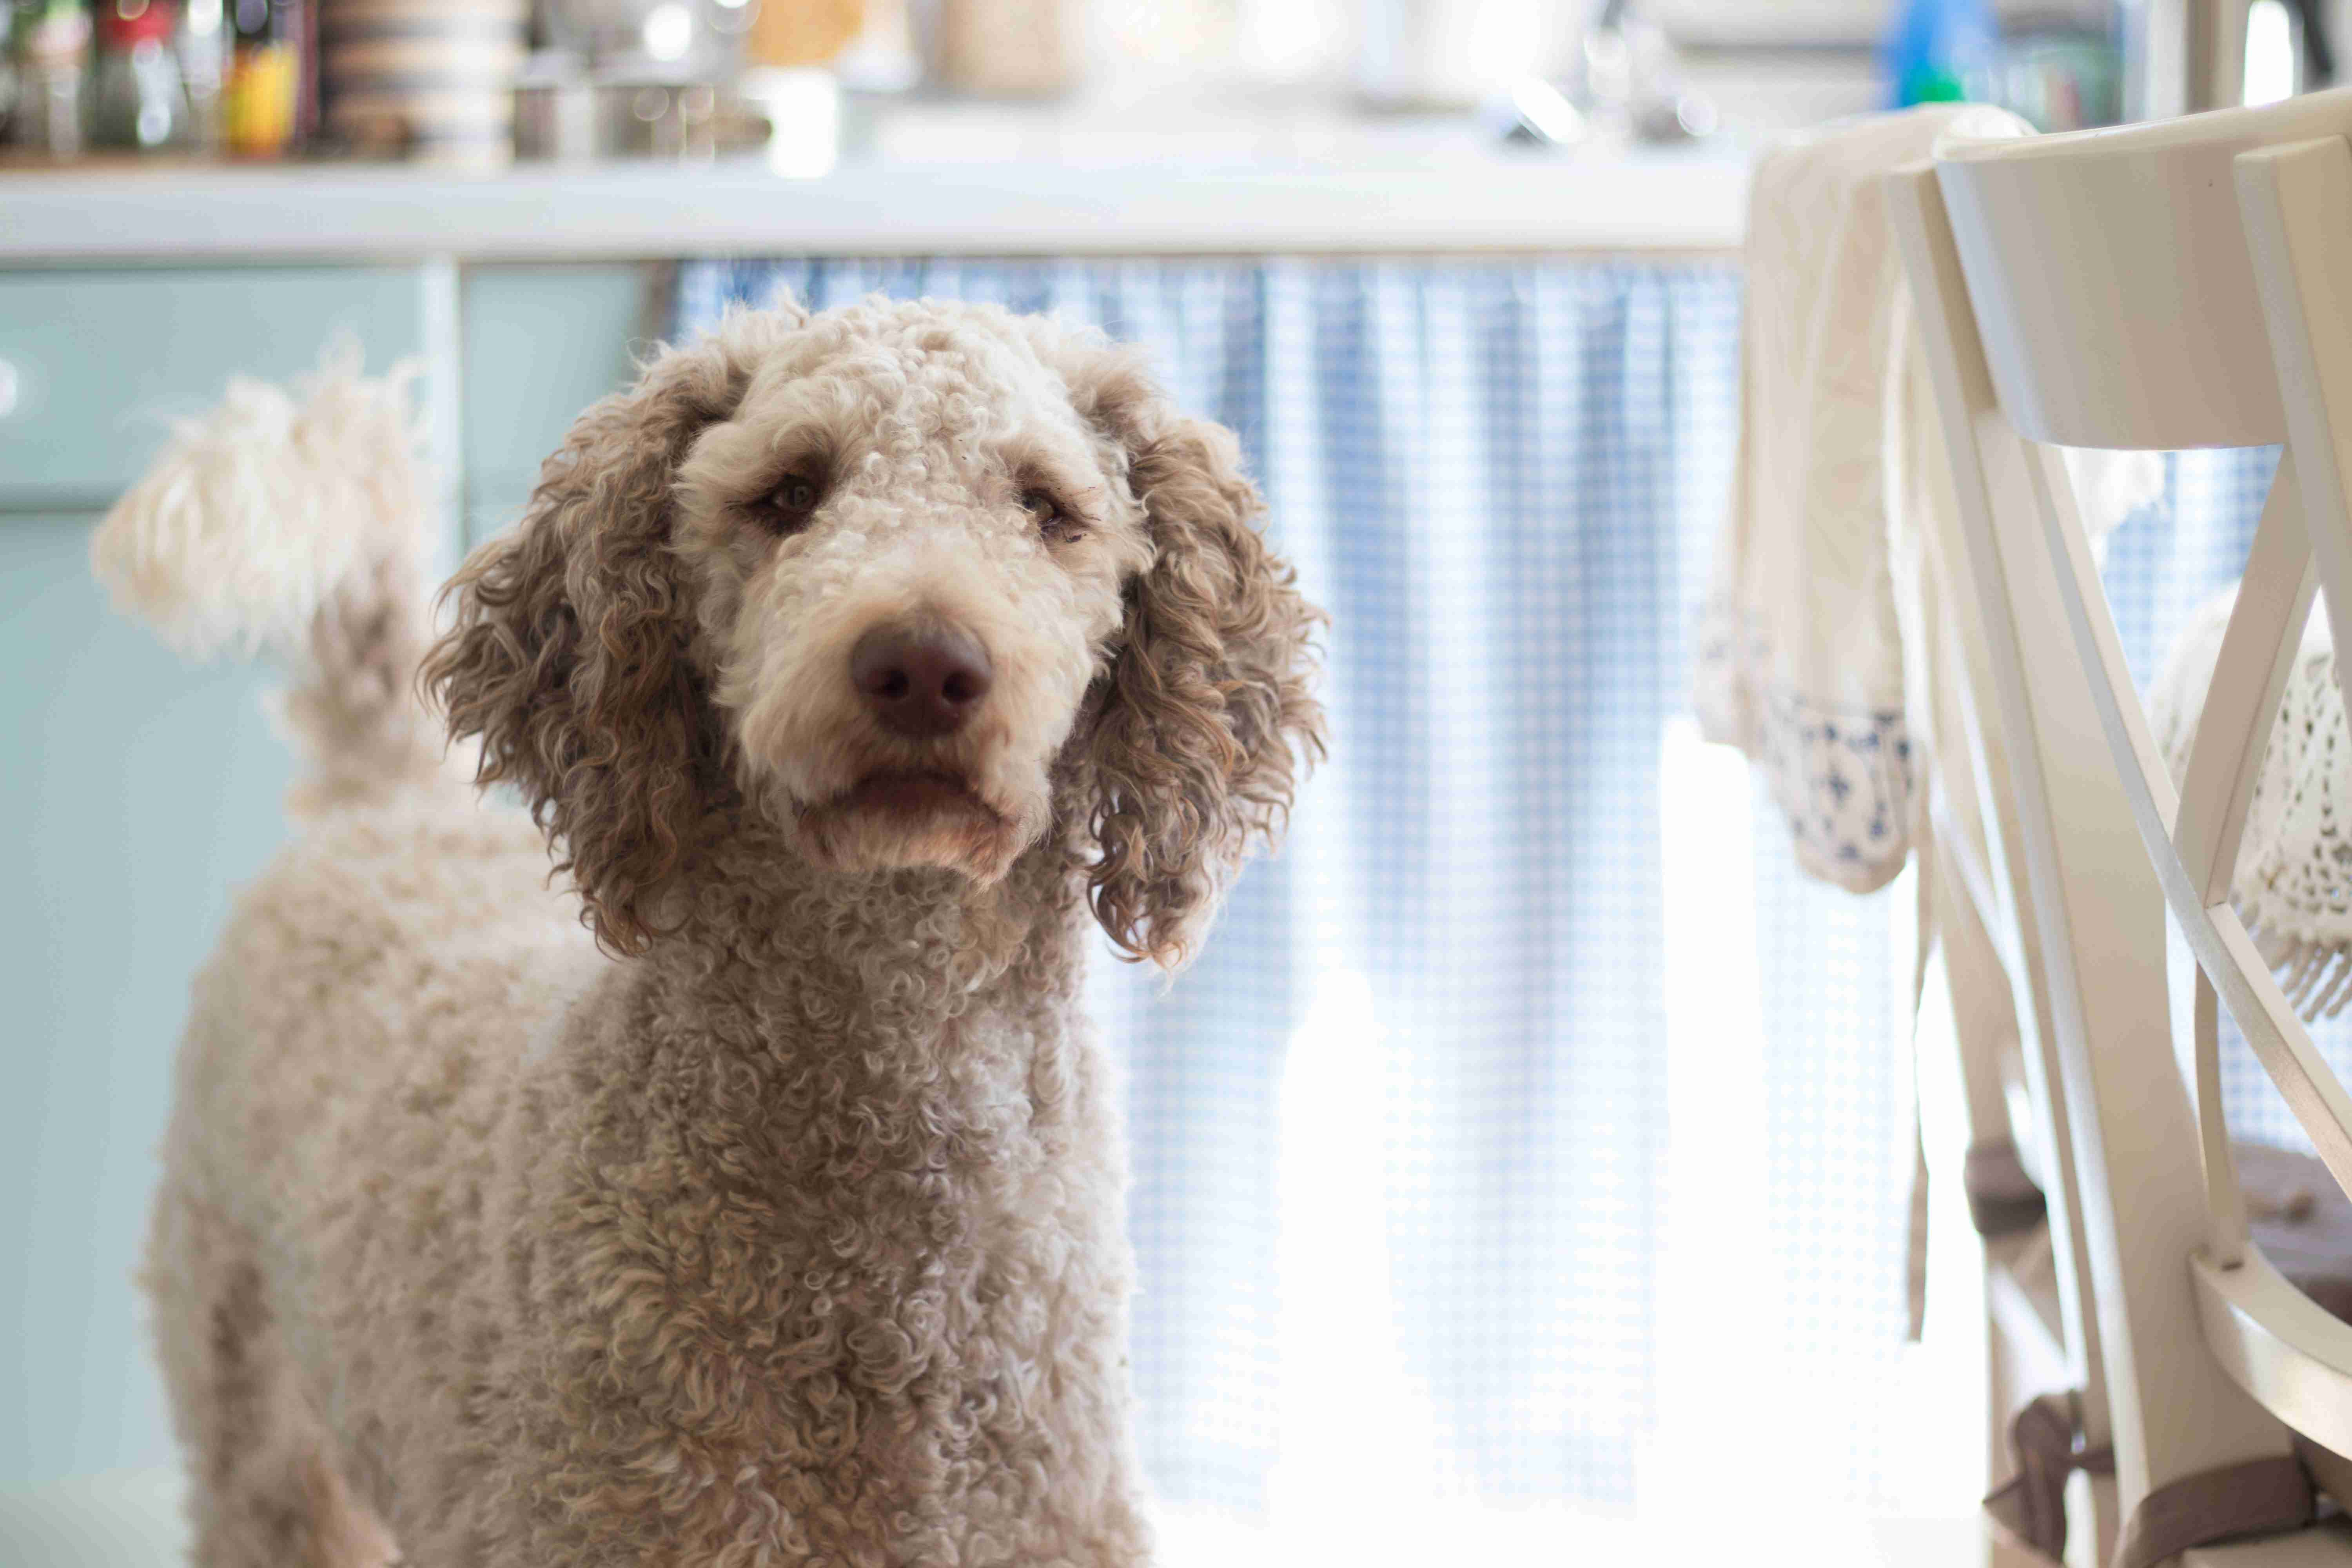 How did you introduce your Poodle puppy to basic commands and obedience training?